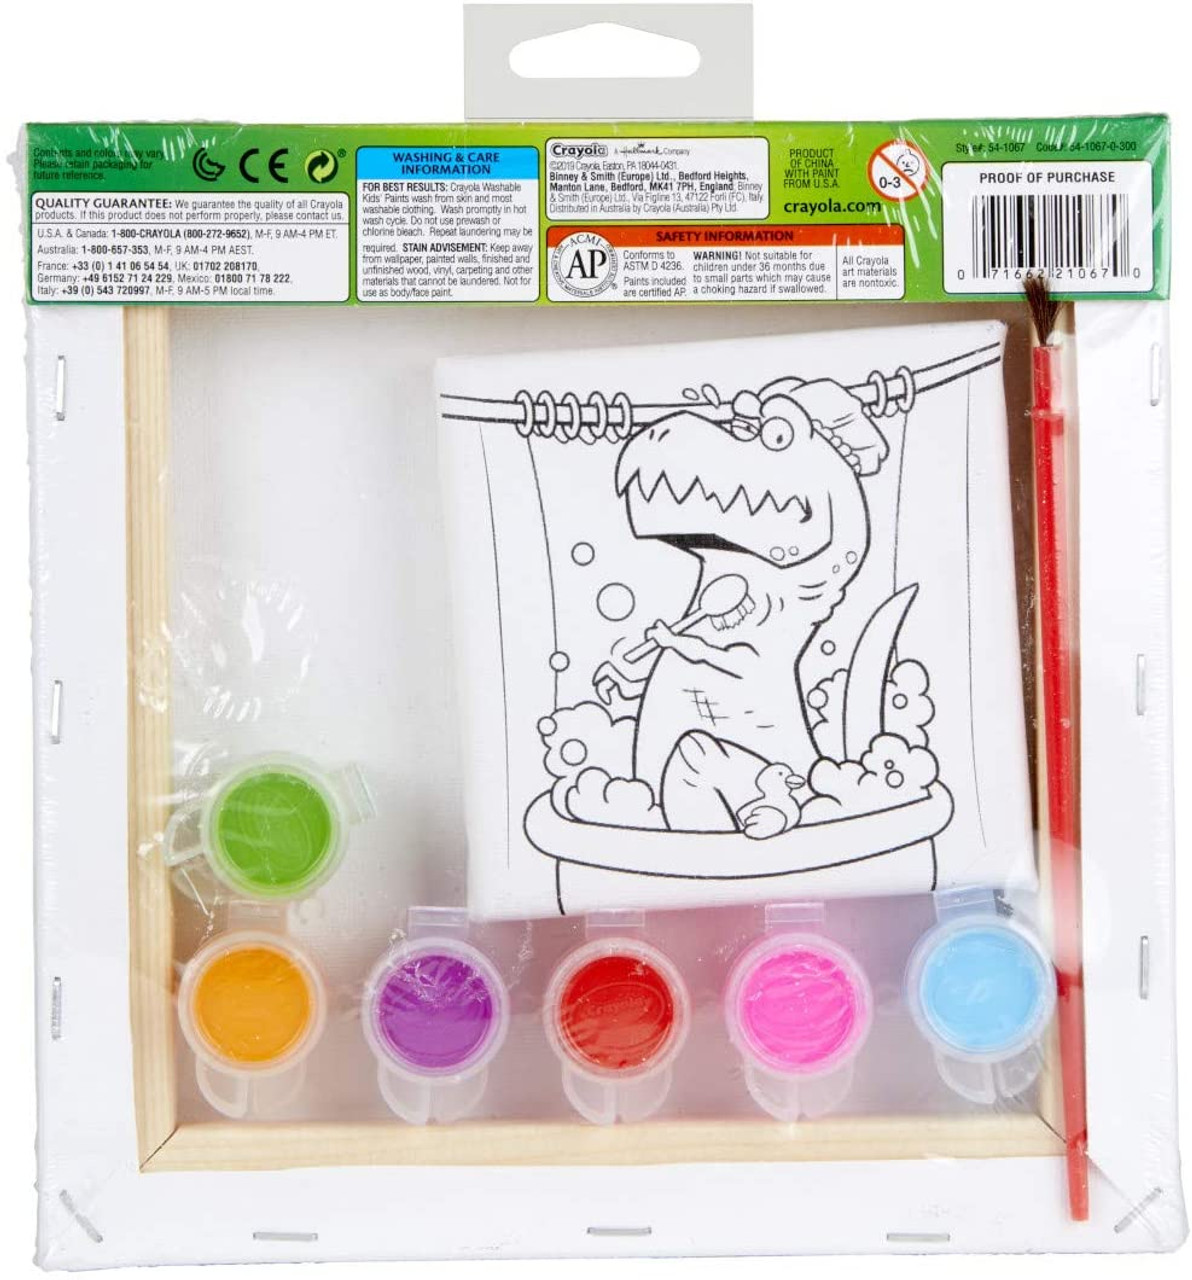 Crayola 54-0125 18 ct. Washable Paint Pots with Brush, Classic & Bold Colors